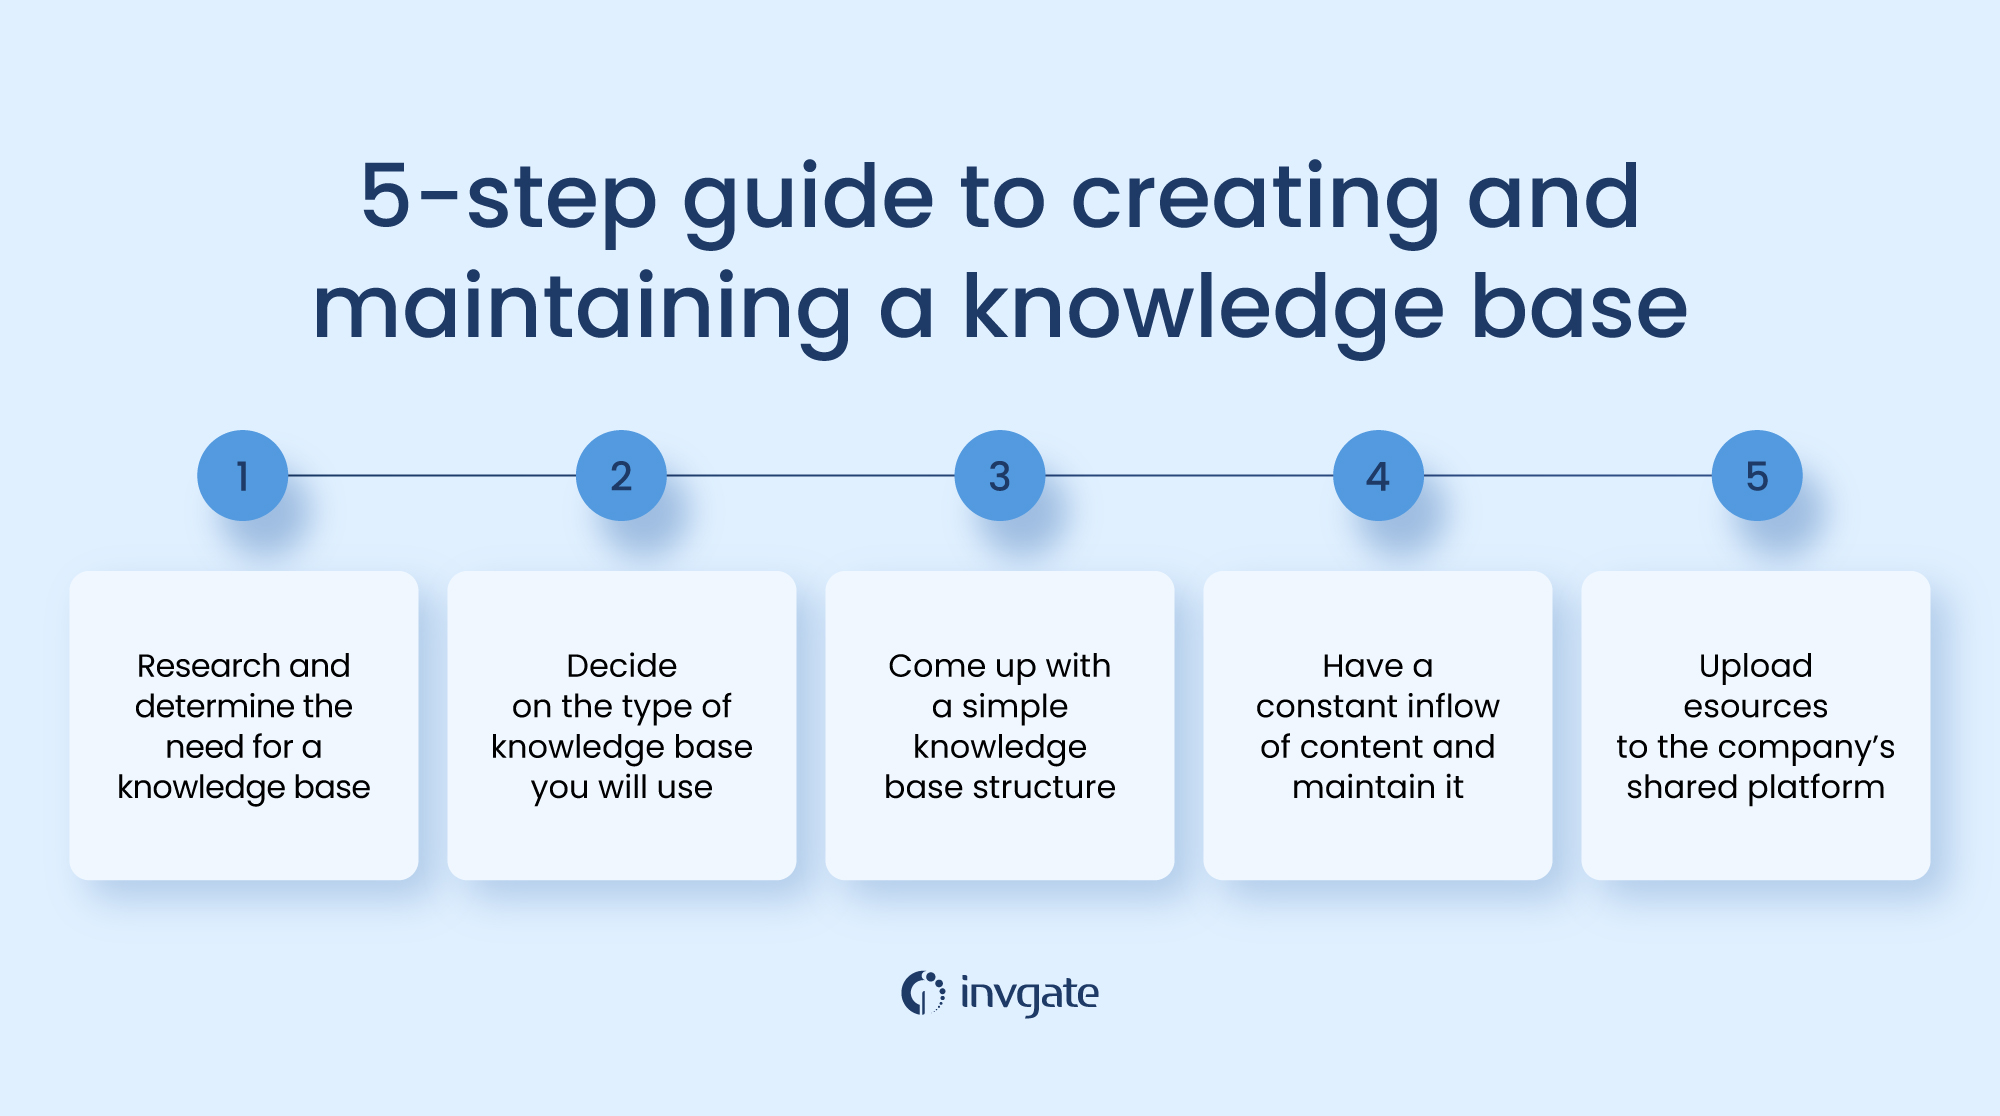 A 5-step guide to creating and maintaining a knowledge base